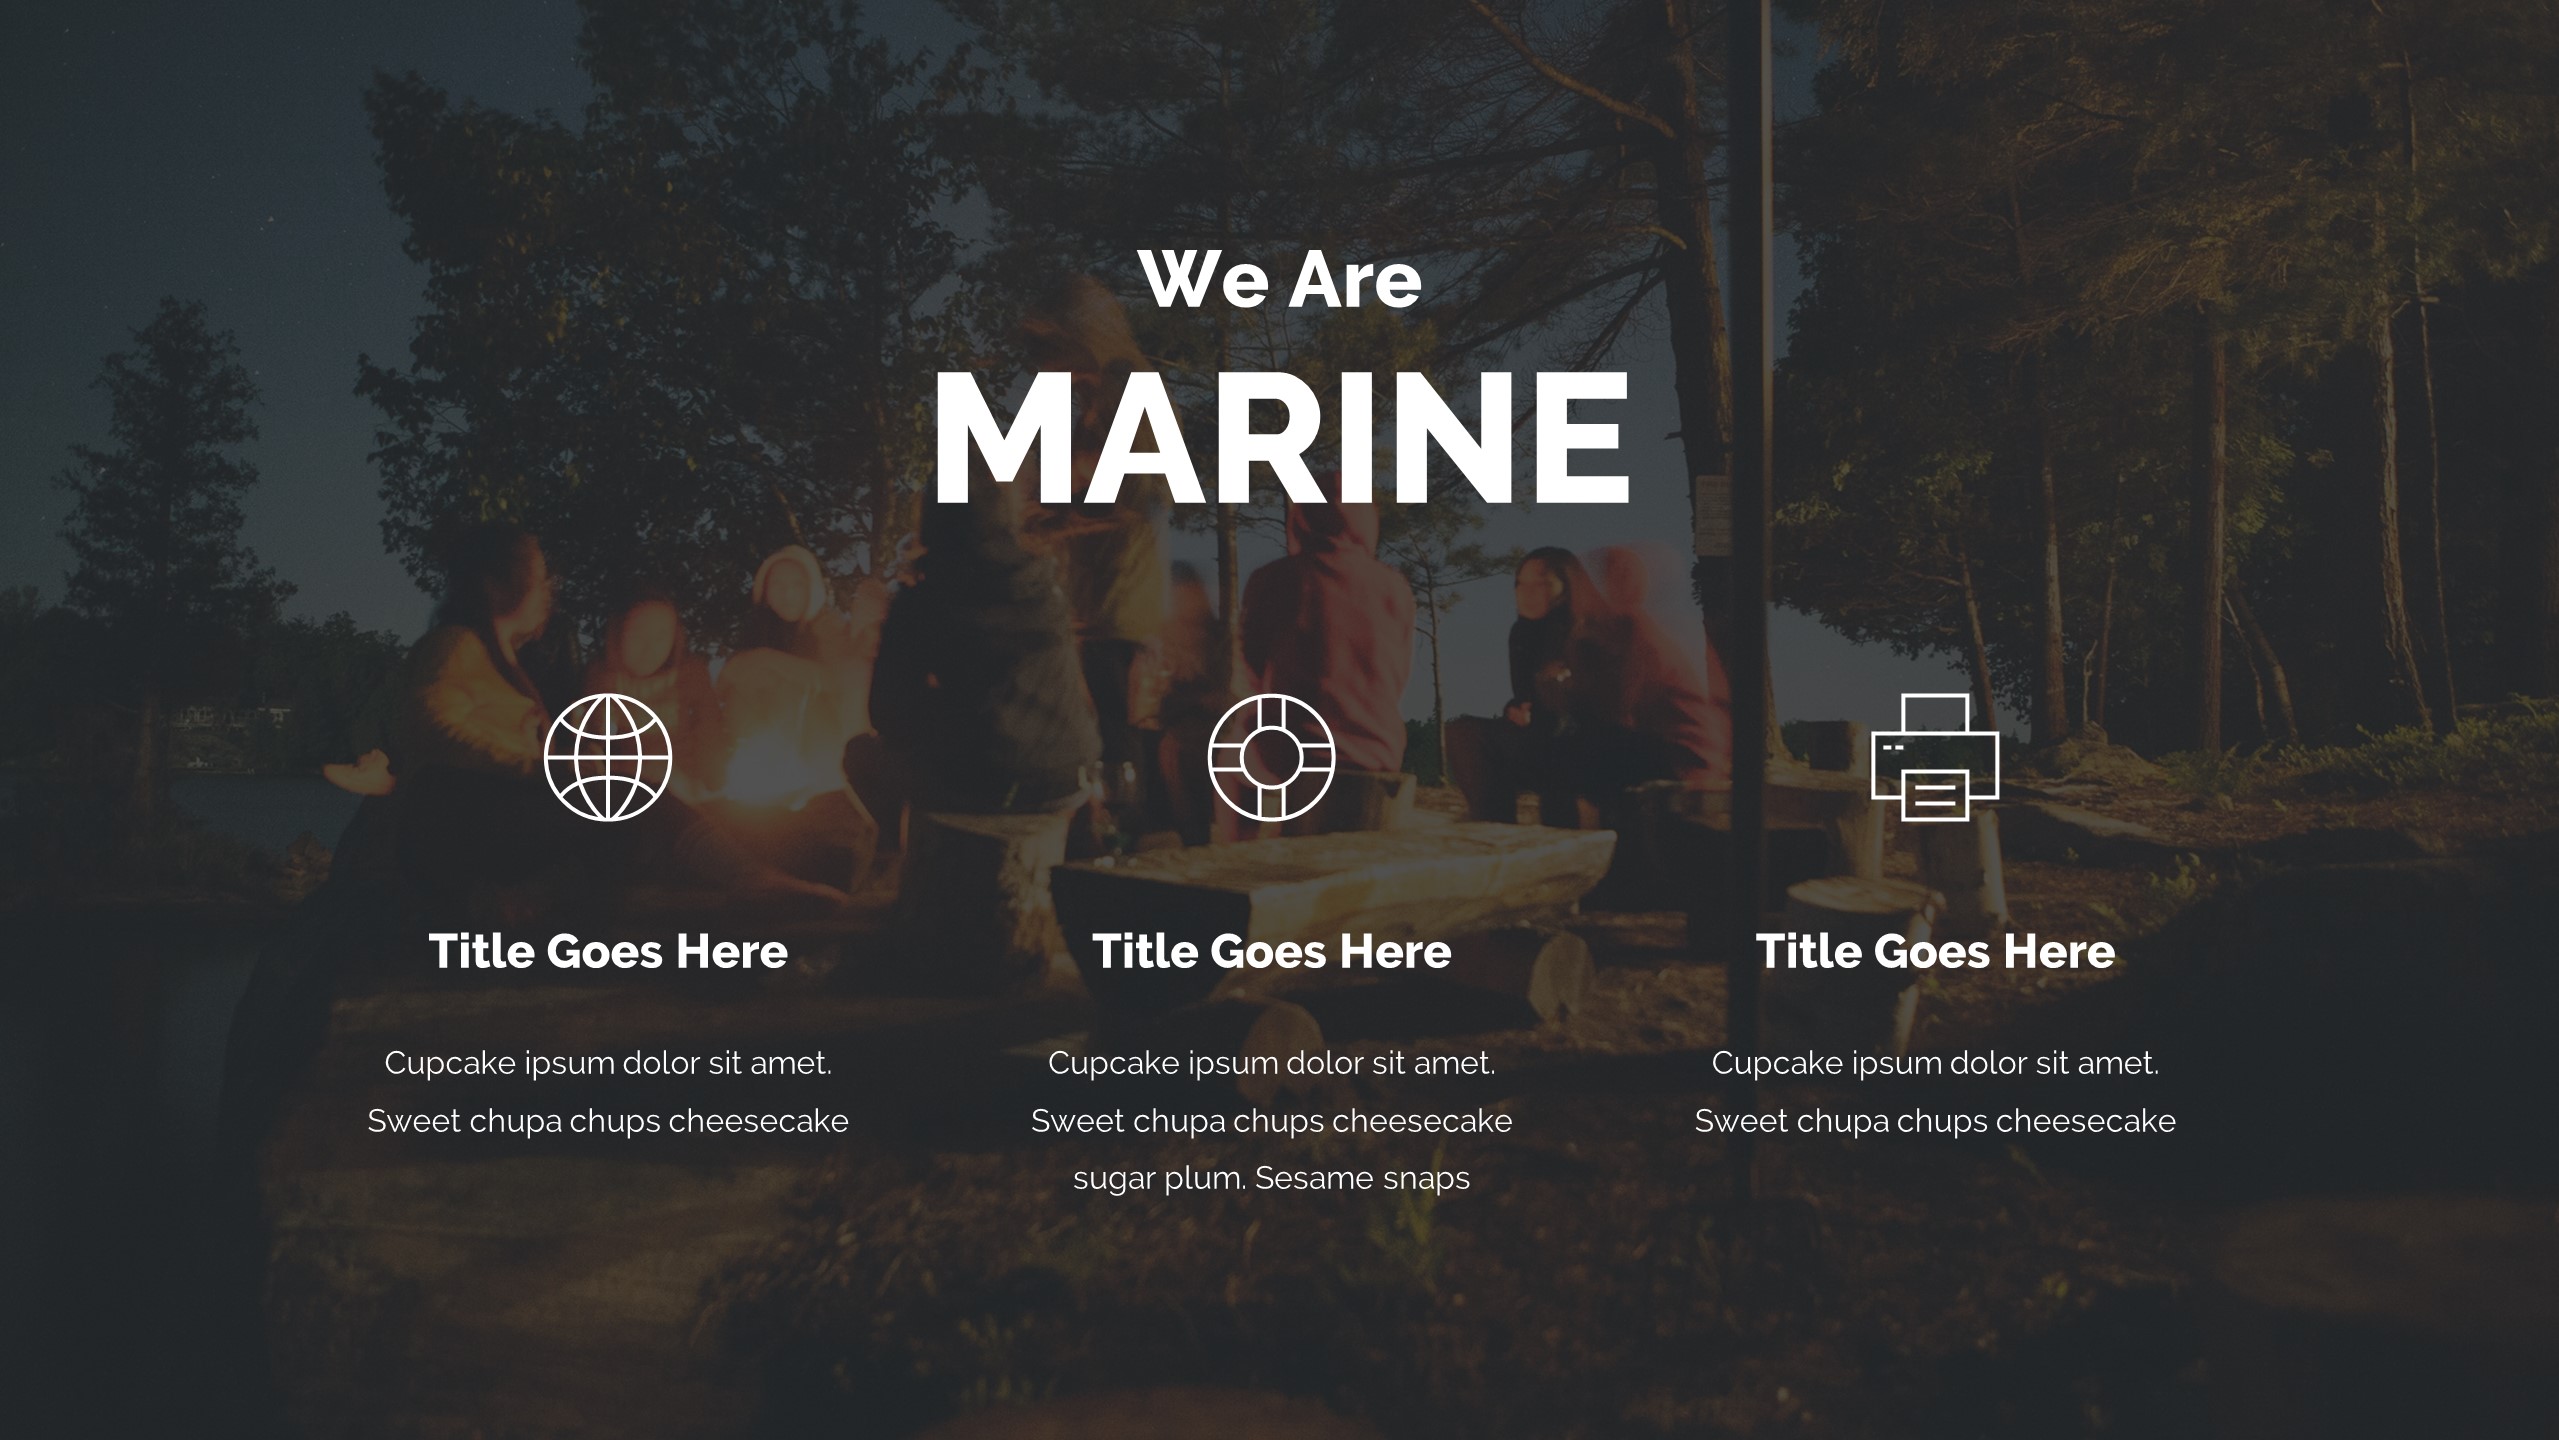 Marine Powerpoint Template by qiudesigns GraphicRiver